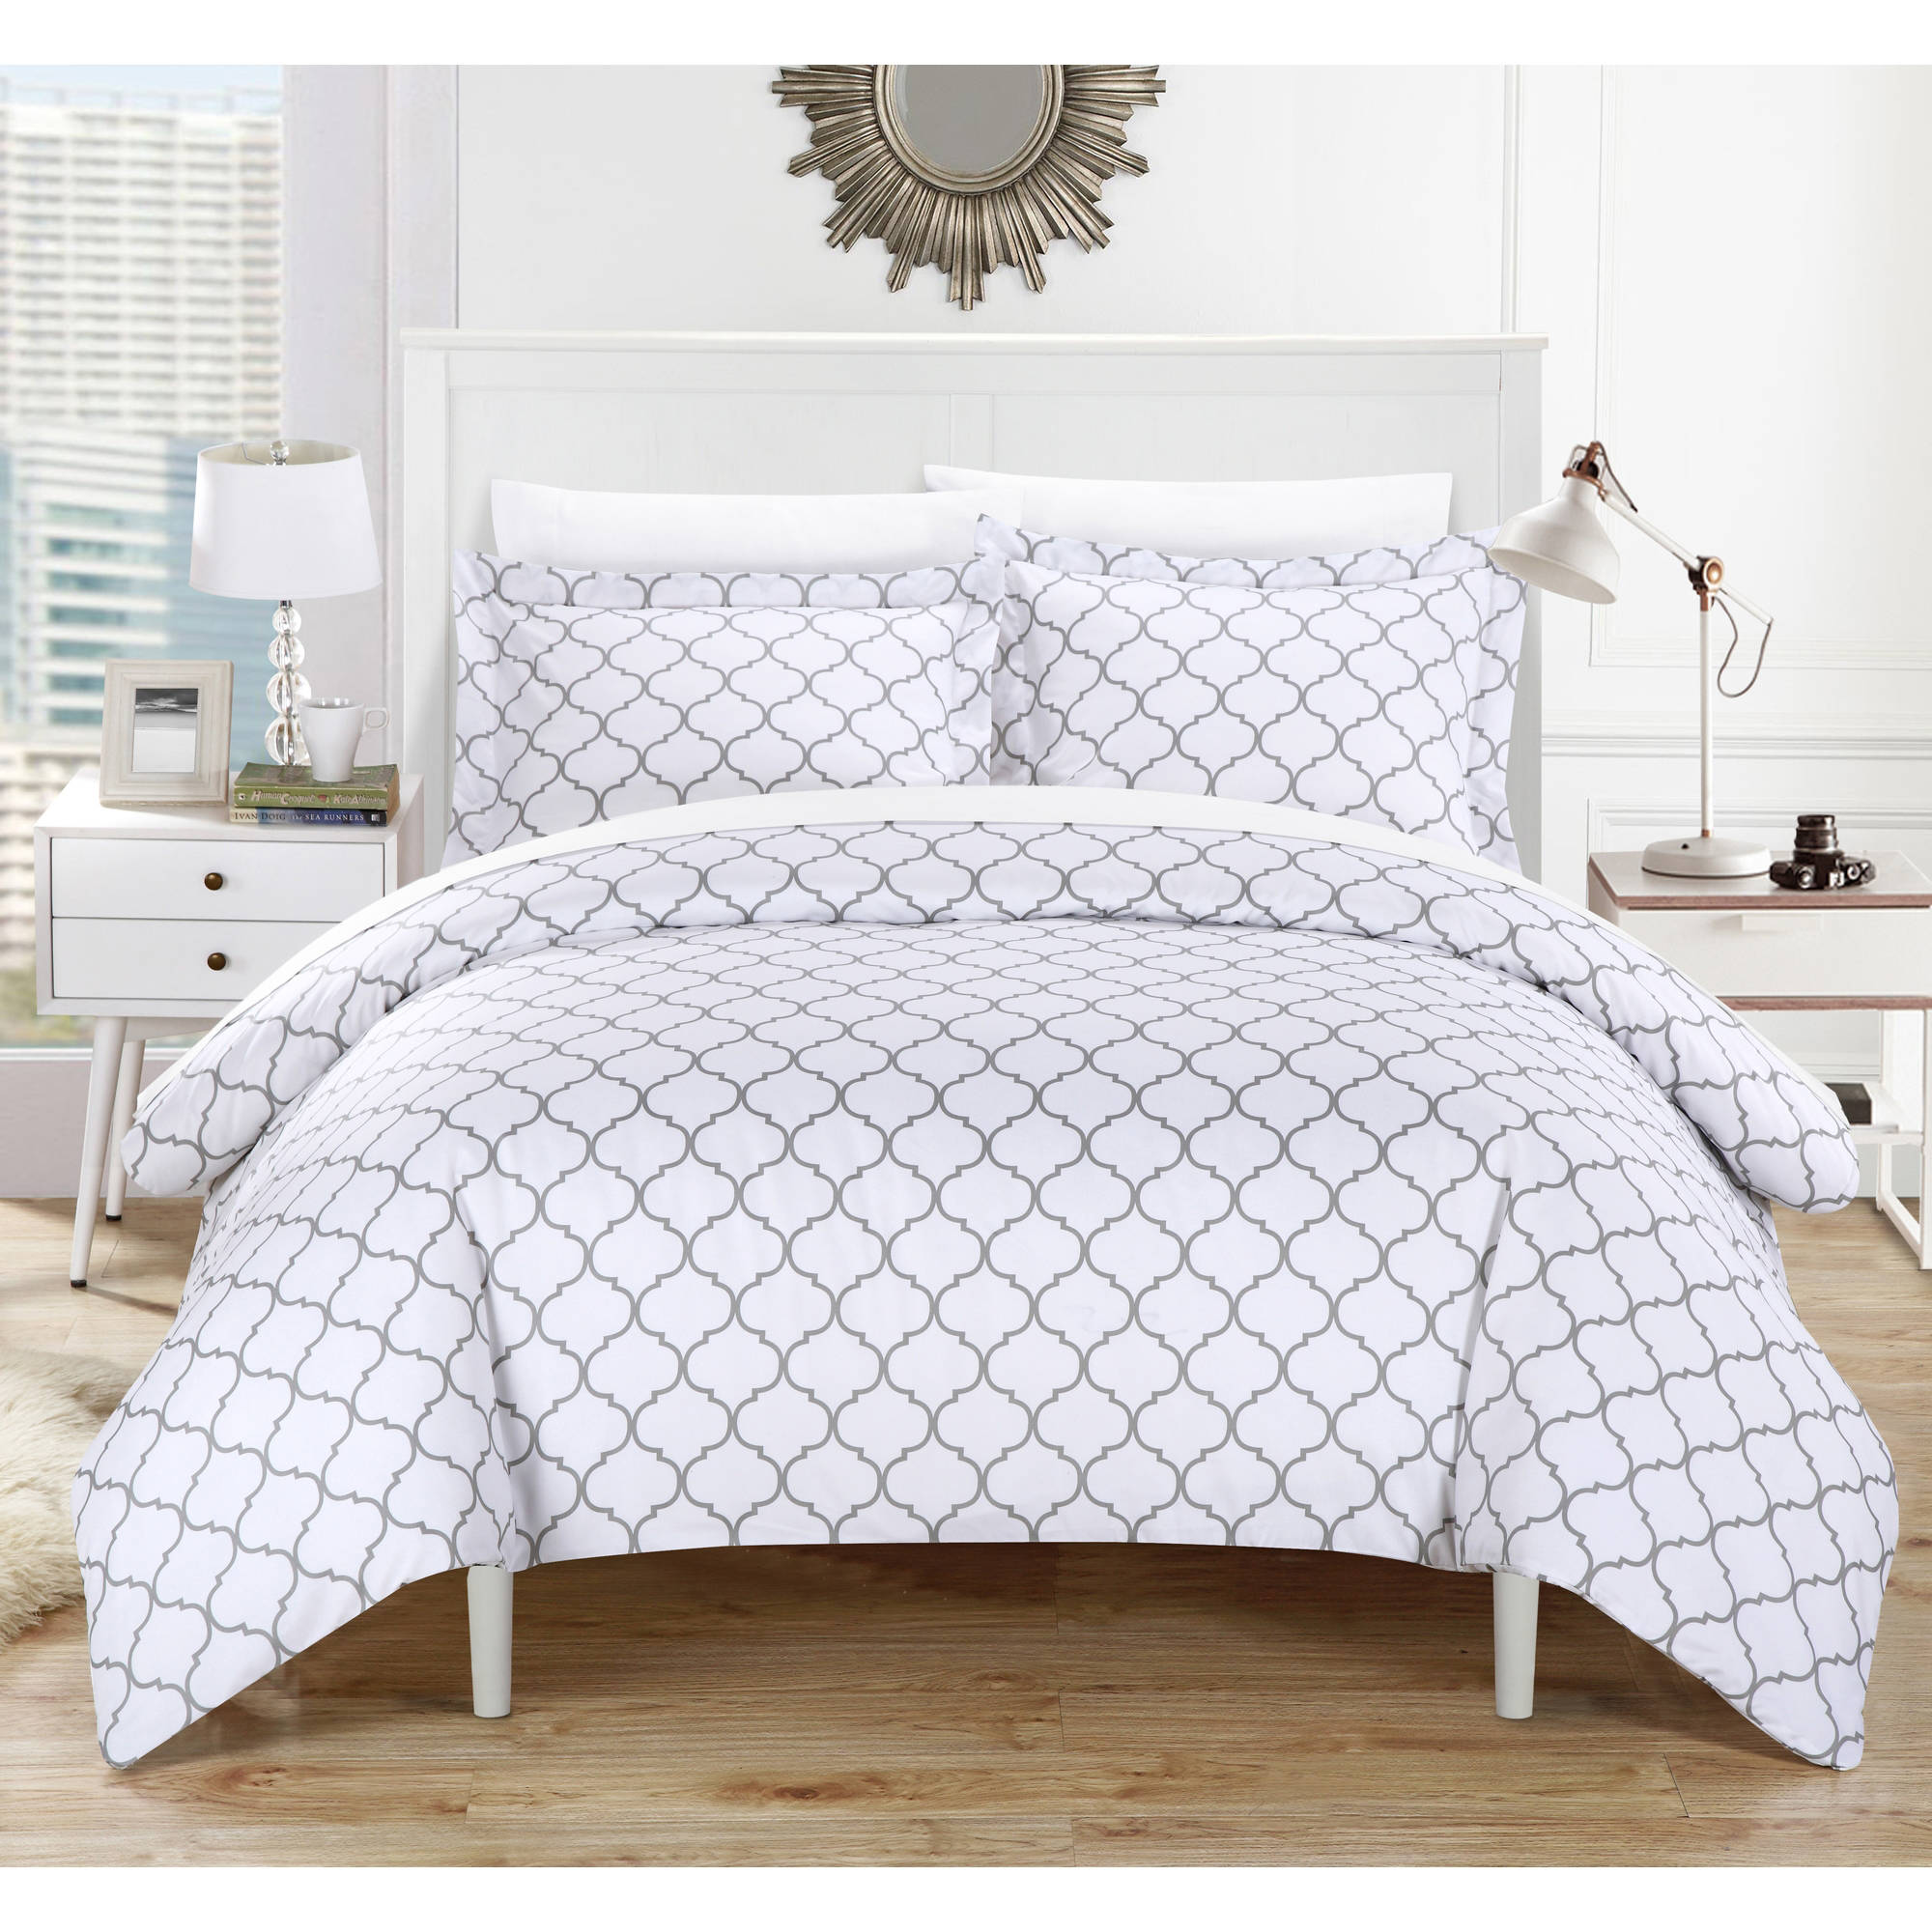 Chic Home Finlay 2-Piece Reversible Geometric Duvet Cover Set, Twin, Grey - image 1 of 2